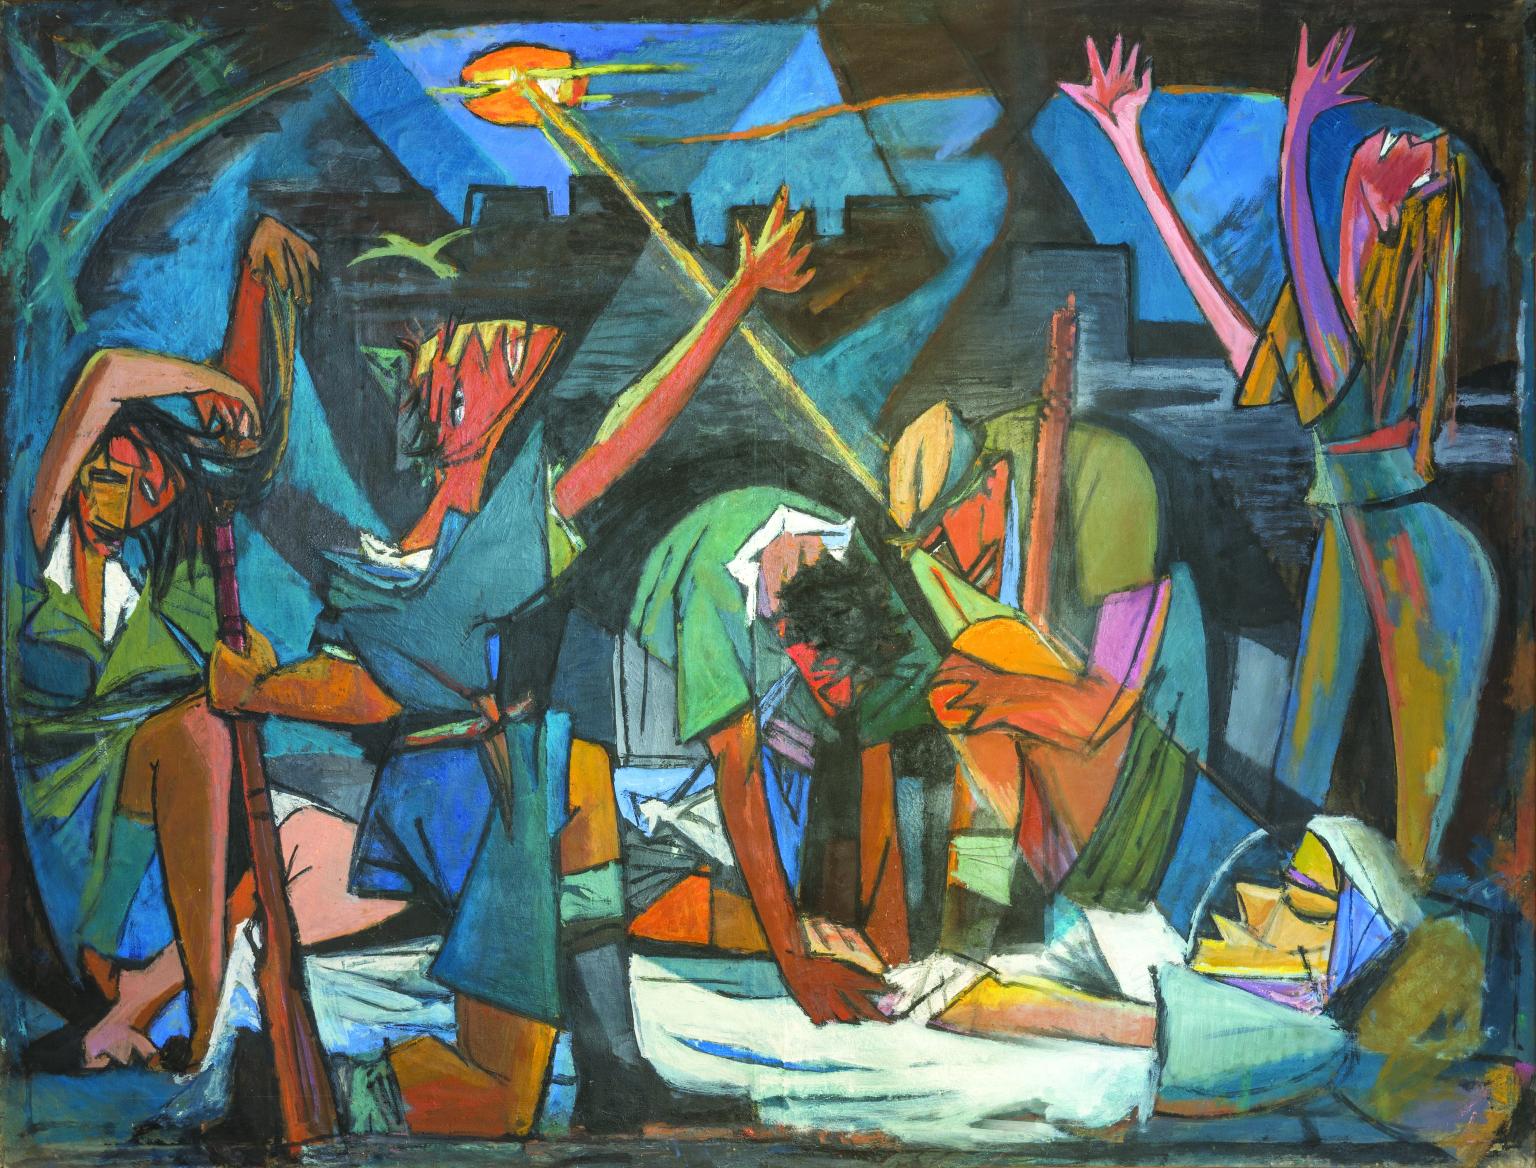 Abstract painting of figures made up of geometric shapes with arms raised and distraught expressions standing over figure lying in middle of floor in white robes.